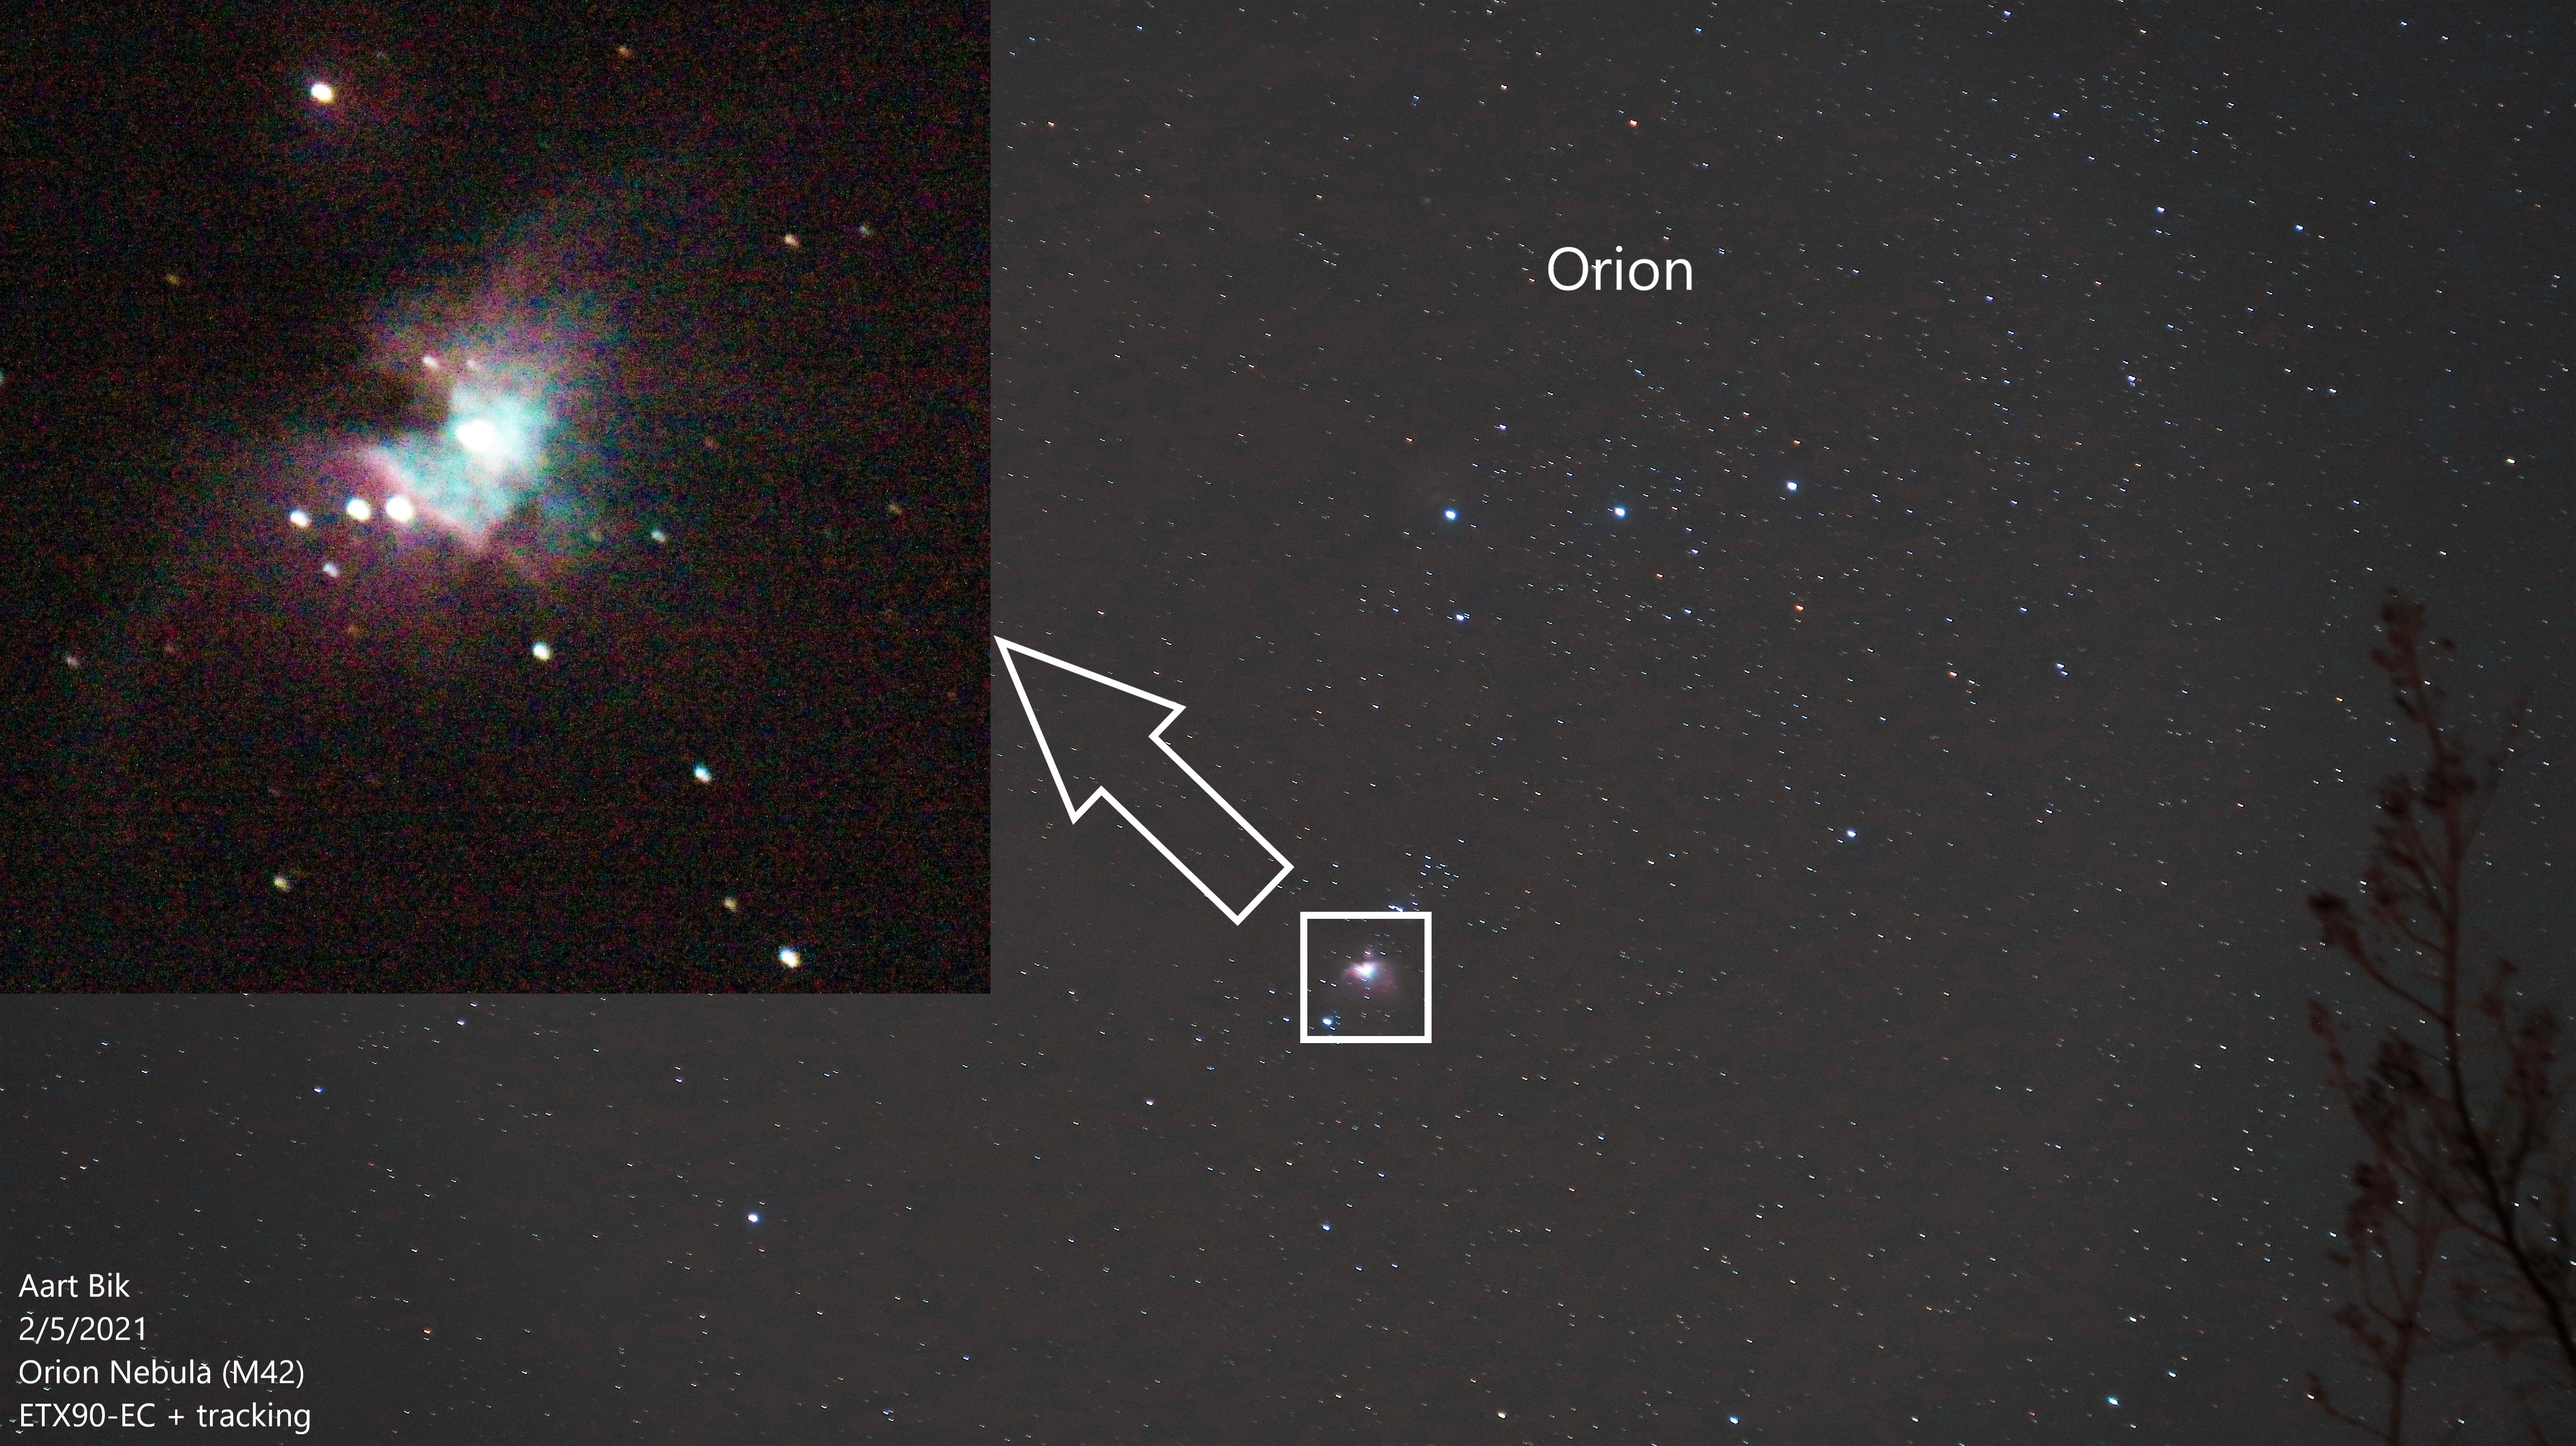 [orion]